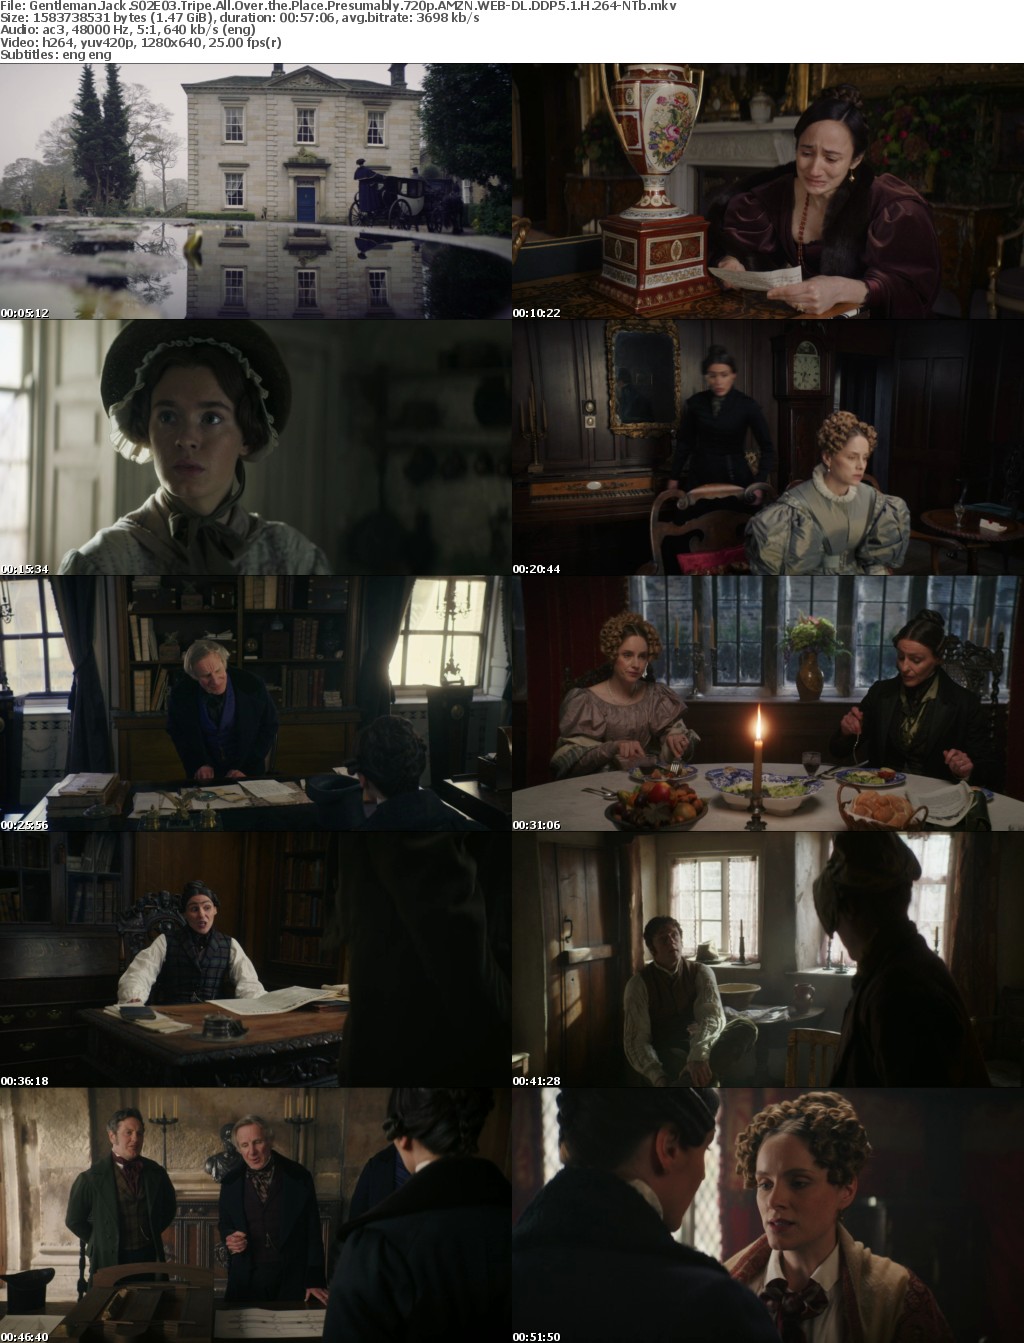 Gentleman Jack S02E03 Tripe All Over the Place Presumably 720p AMZN WEBRip DDP5 1 x264-NTb